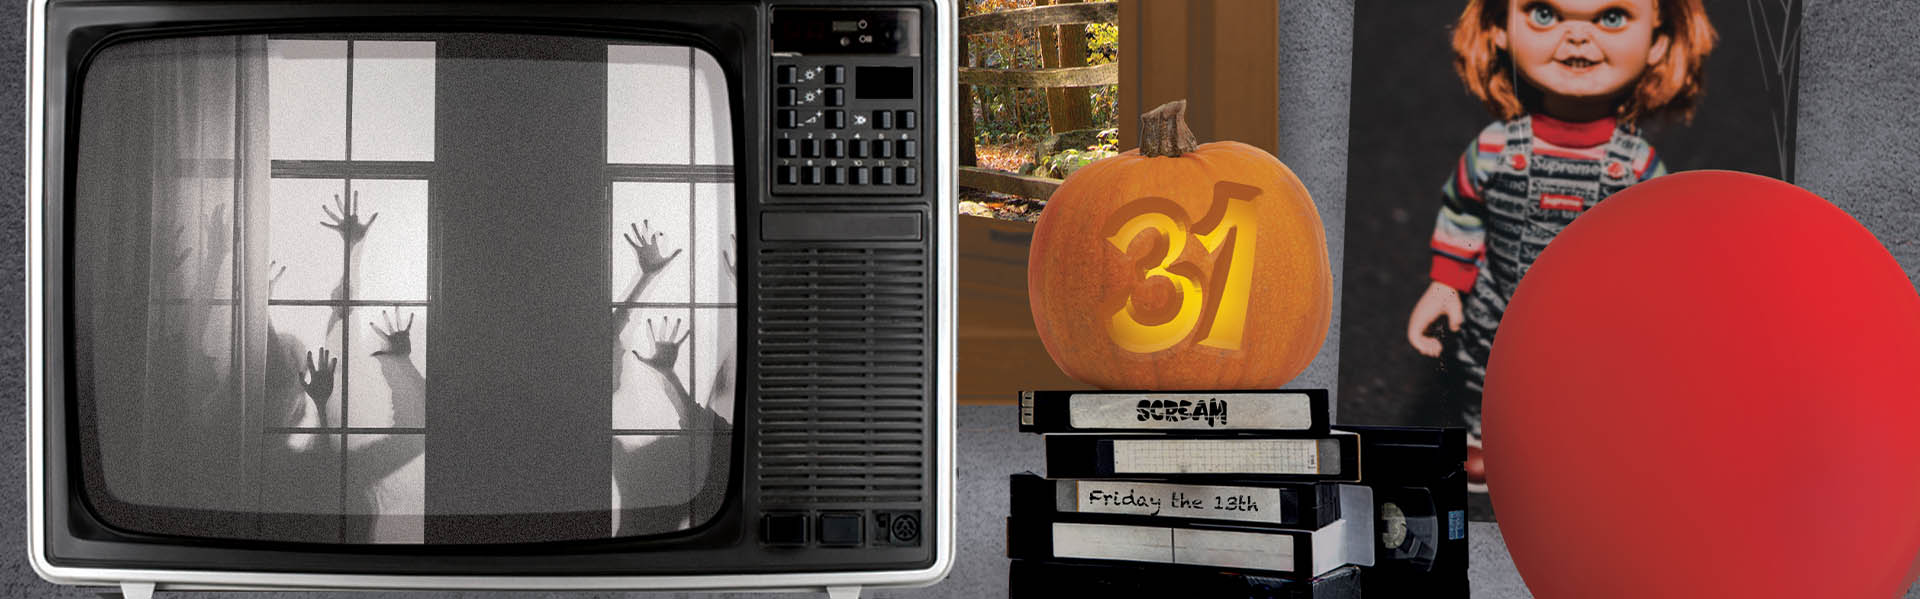 A red balloon, a Chucky doll, an old tube TV with hands pressed against a window showing and an illustration of a stack of VHS tapes with a pumpkin on top with the number thirty-one carved into it